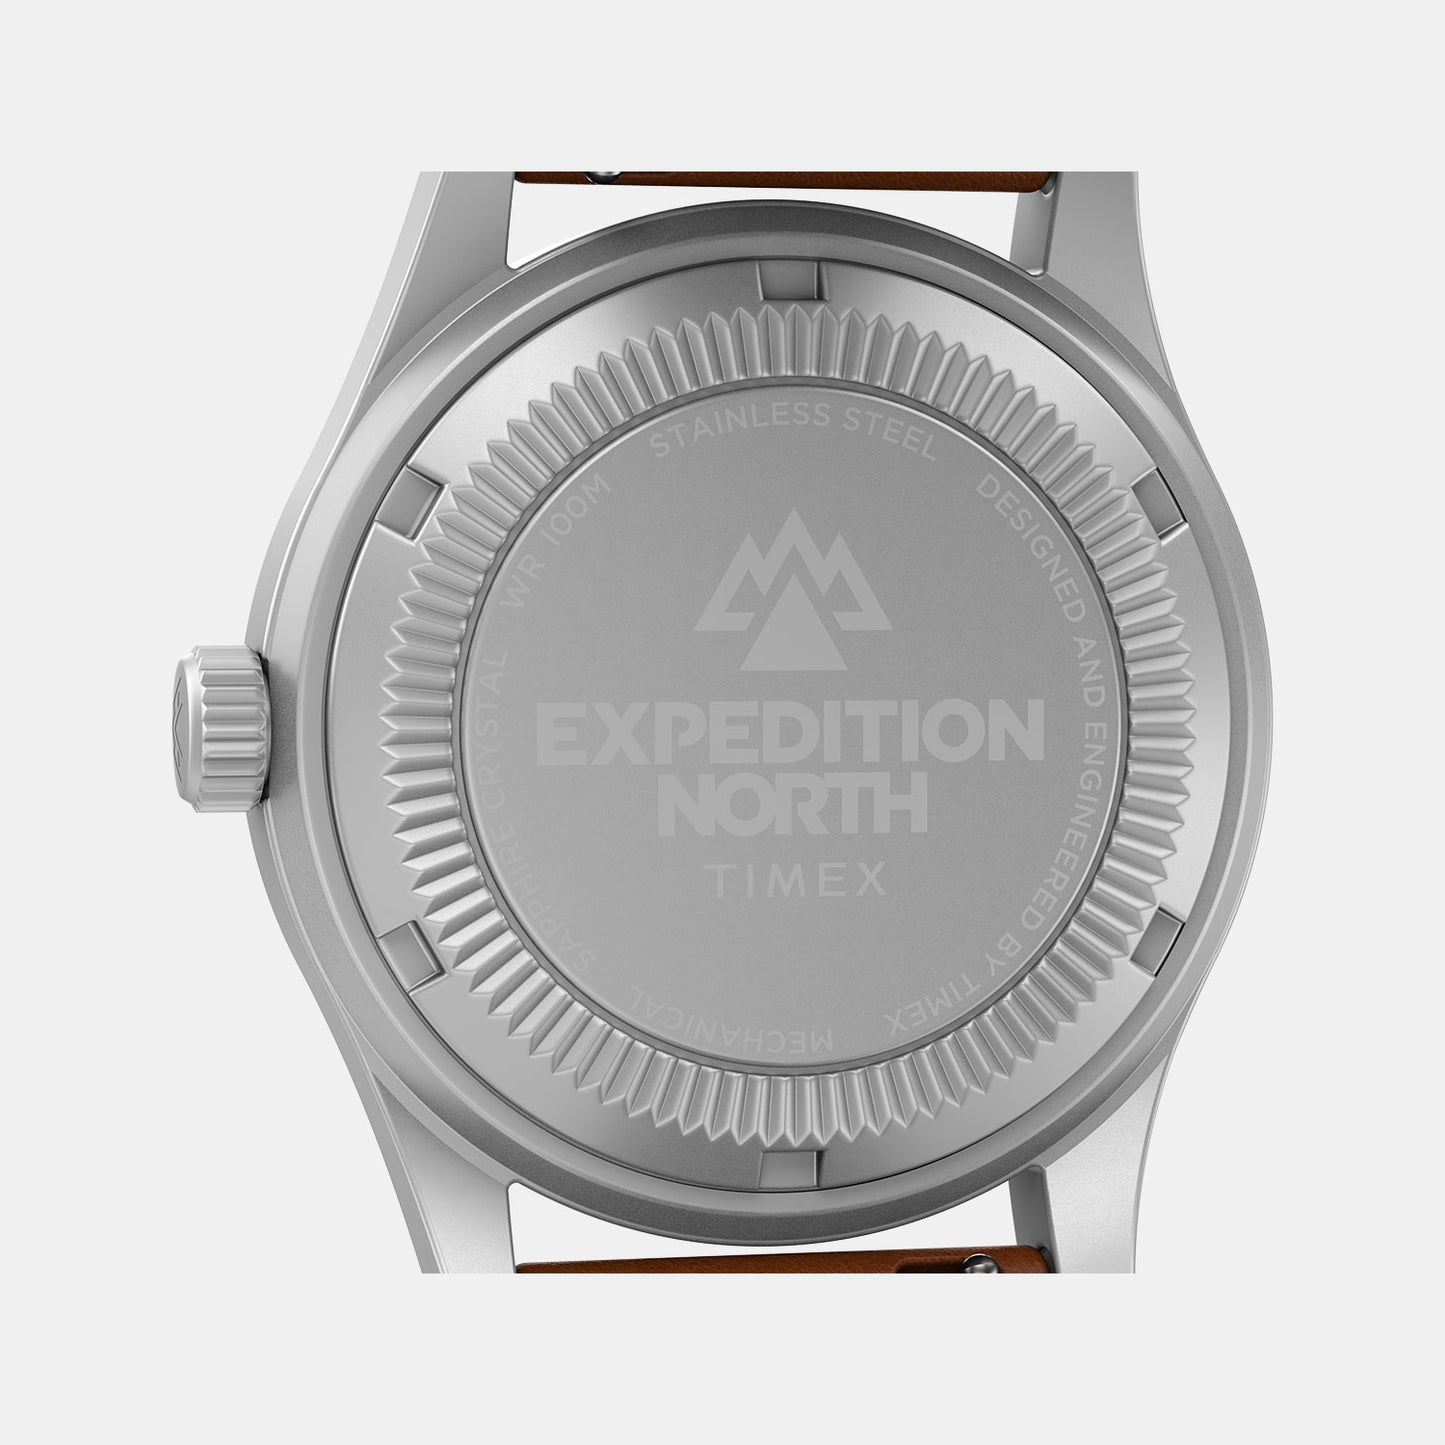 Expedition North Male White Analog Stainless Steel Watch TW2V00600X6